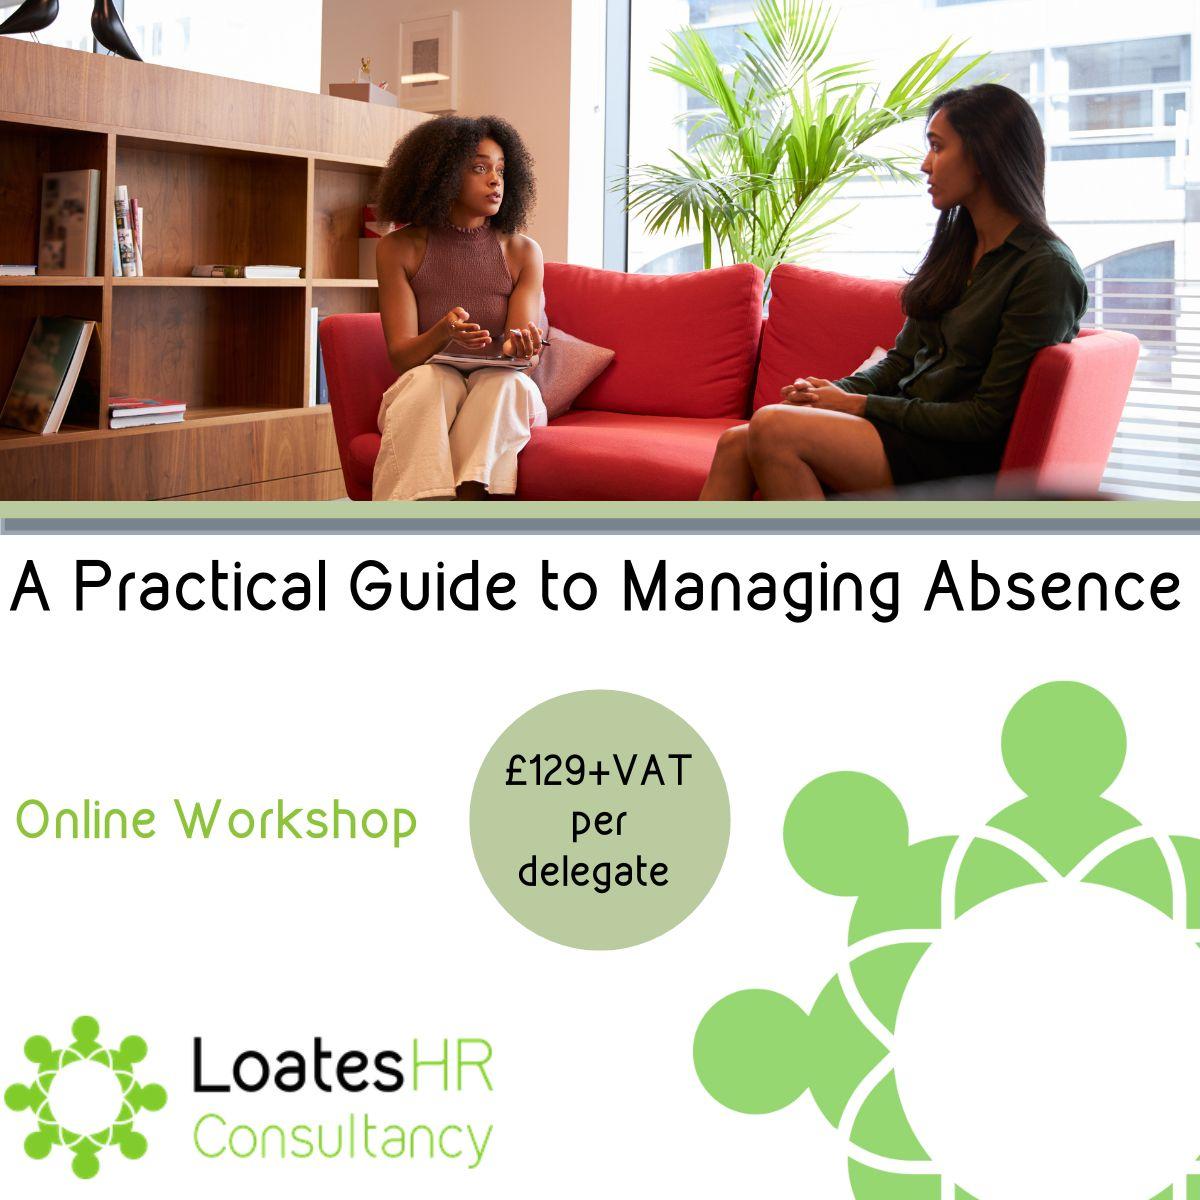 Make sure your business is prepared for managing absences with our online training course 'A Practical Guide to Managing Absence'. Taking place on Wed 3 May 2023 📆 💻 🤝 #absencemanagement #training #hr #cipd #loateshrconsultancy bit.ly/3jlMcCS